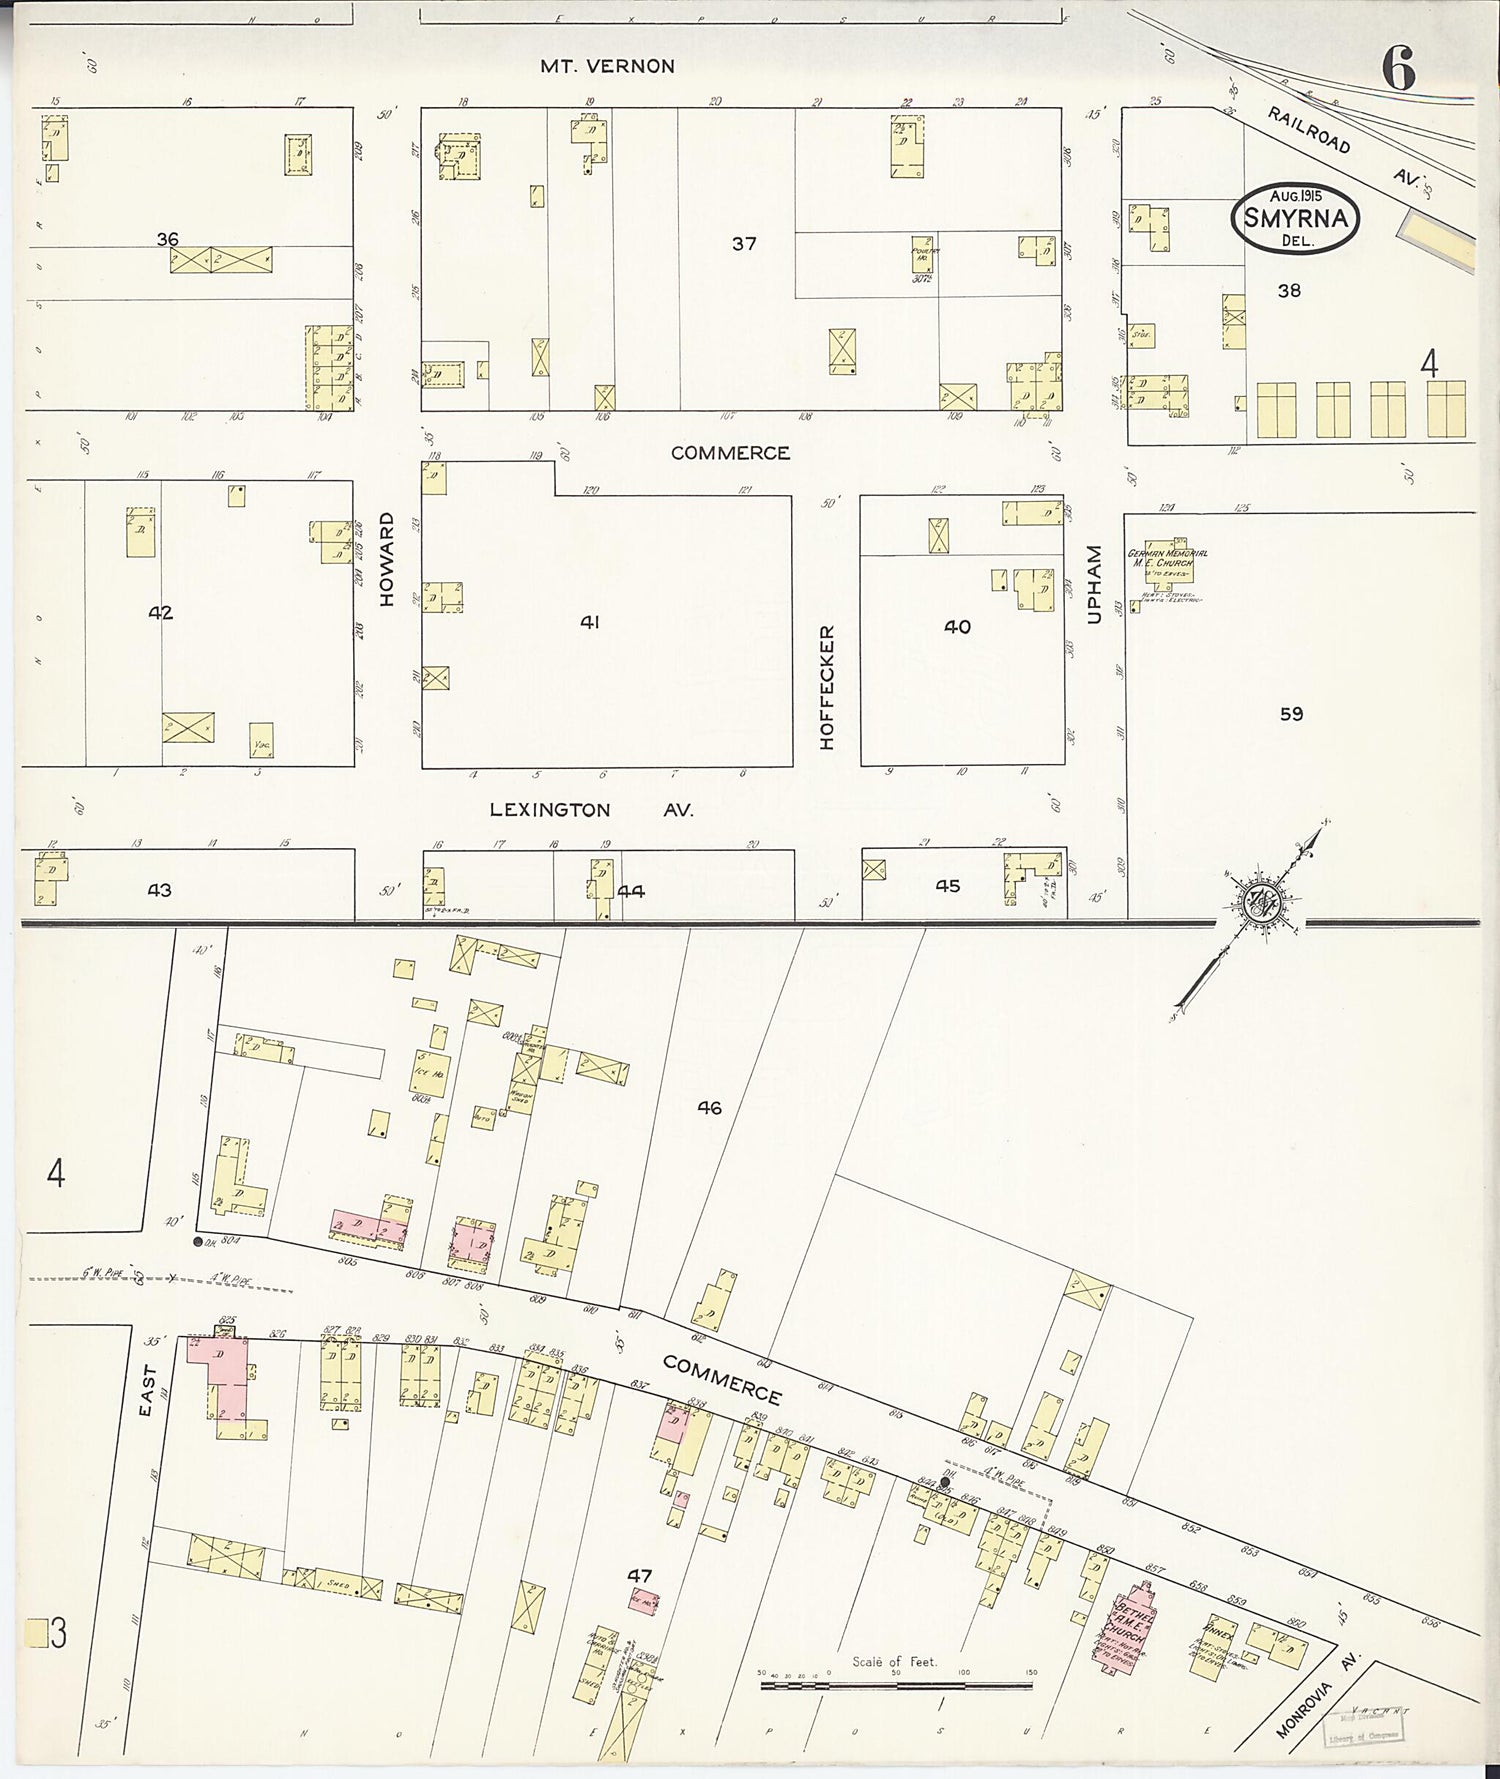 This old map of Smyrna, Kent County, Delaware was created by Sanborn Map Company in 1915